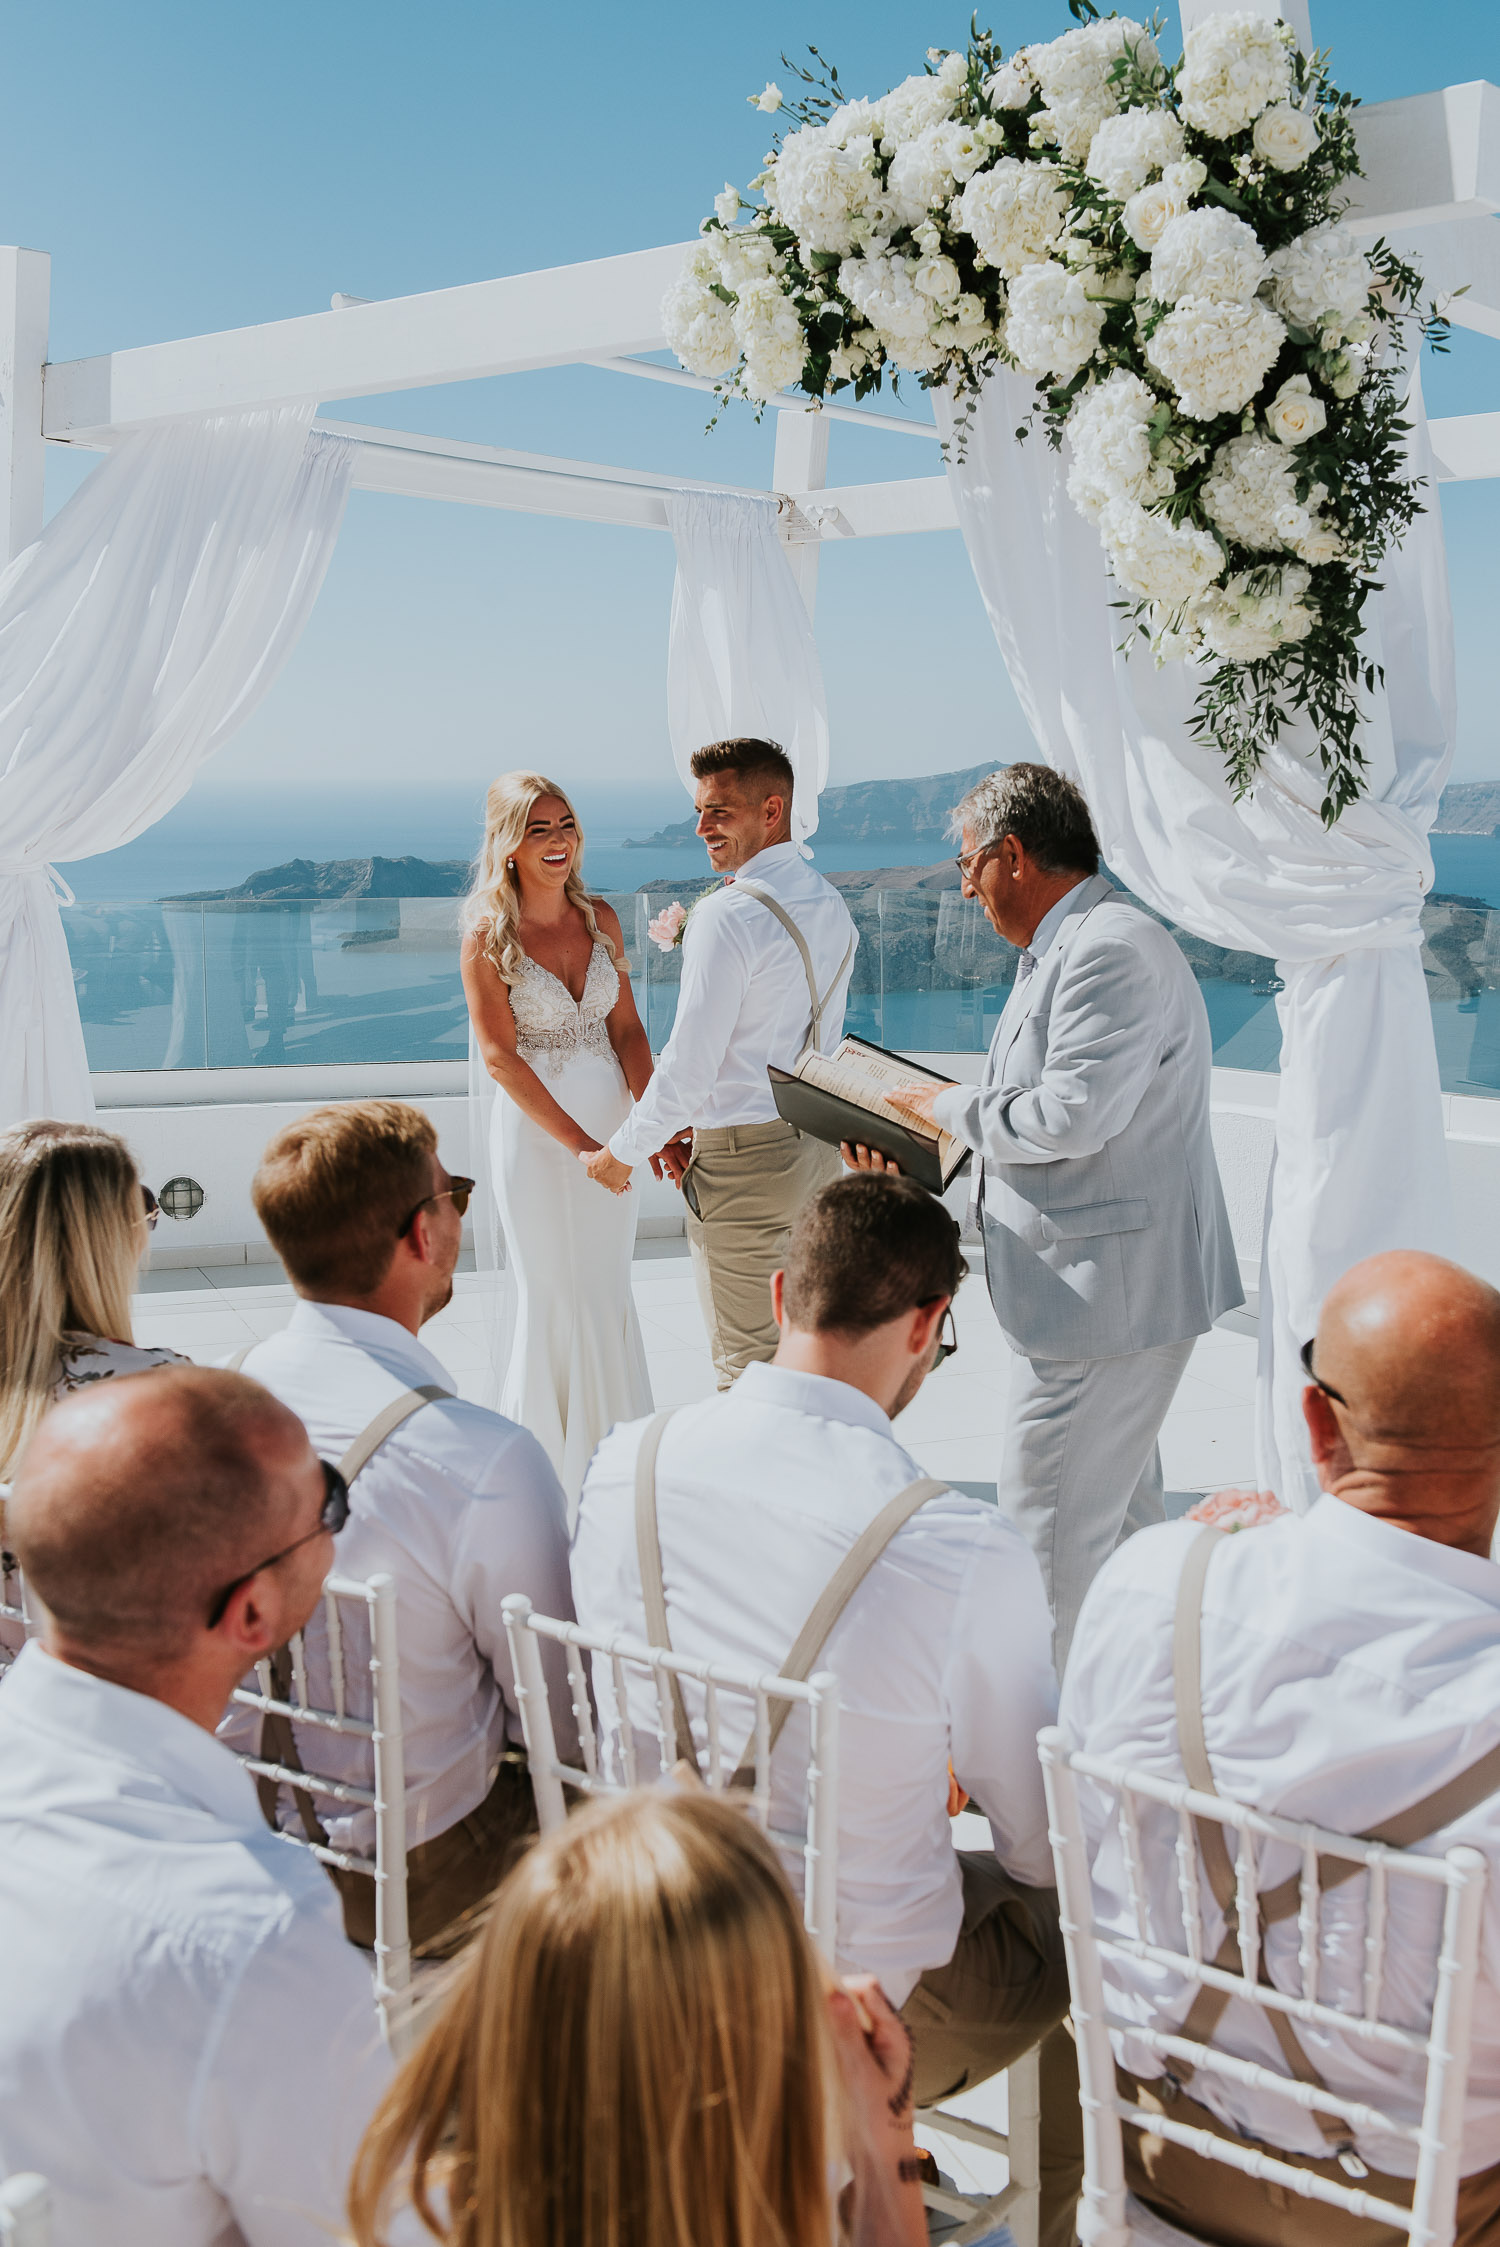 Wedding photographer Santorini: bride and groom standing holding hands in front of gazebo photographed over their guests by Ben and Vesna.